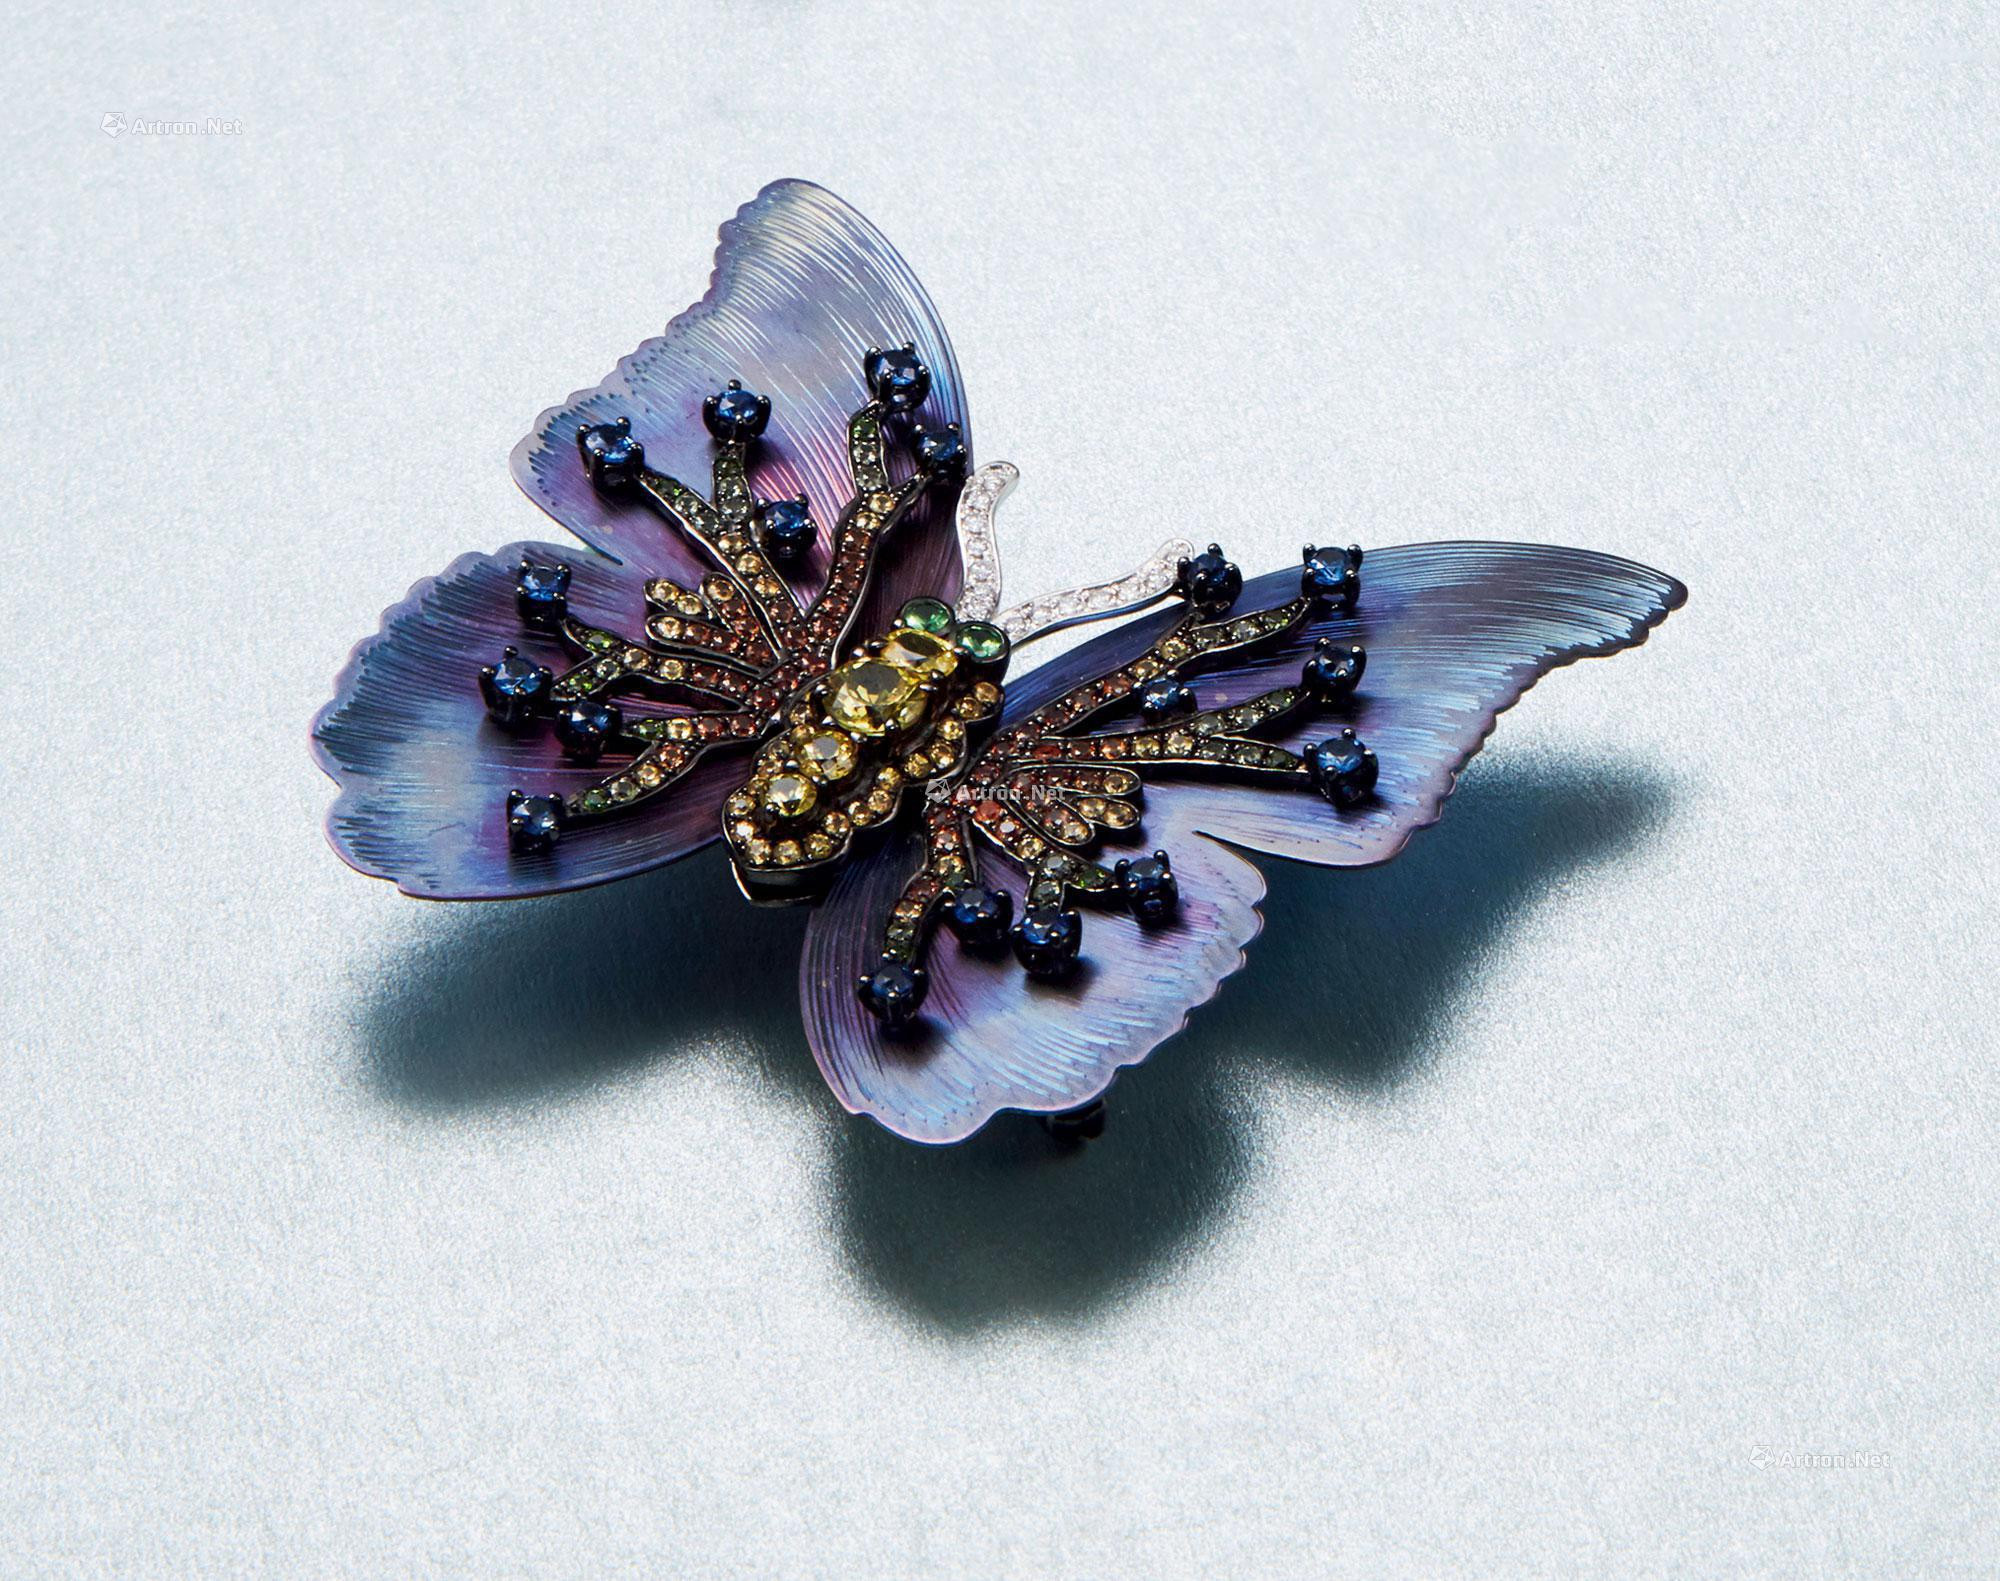 A COLORED GEM AND DIAMOND ‘BUTTERFLY’ BROOCH MOUNTED IN TITANIUM AND 18K GOLD